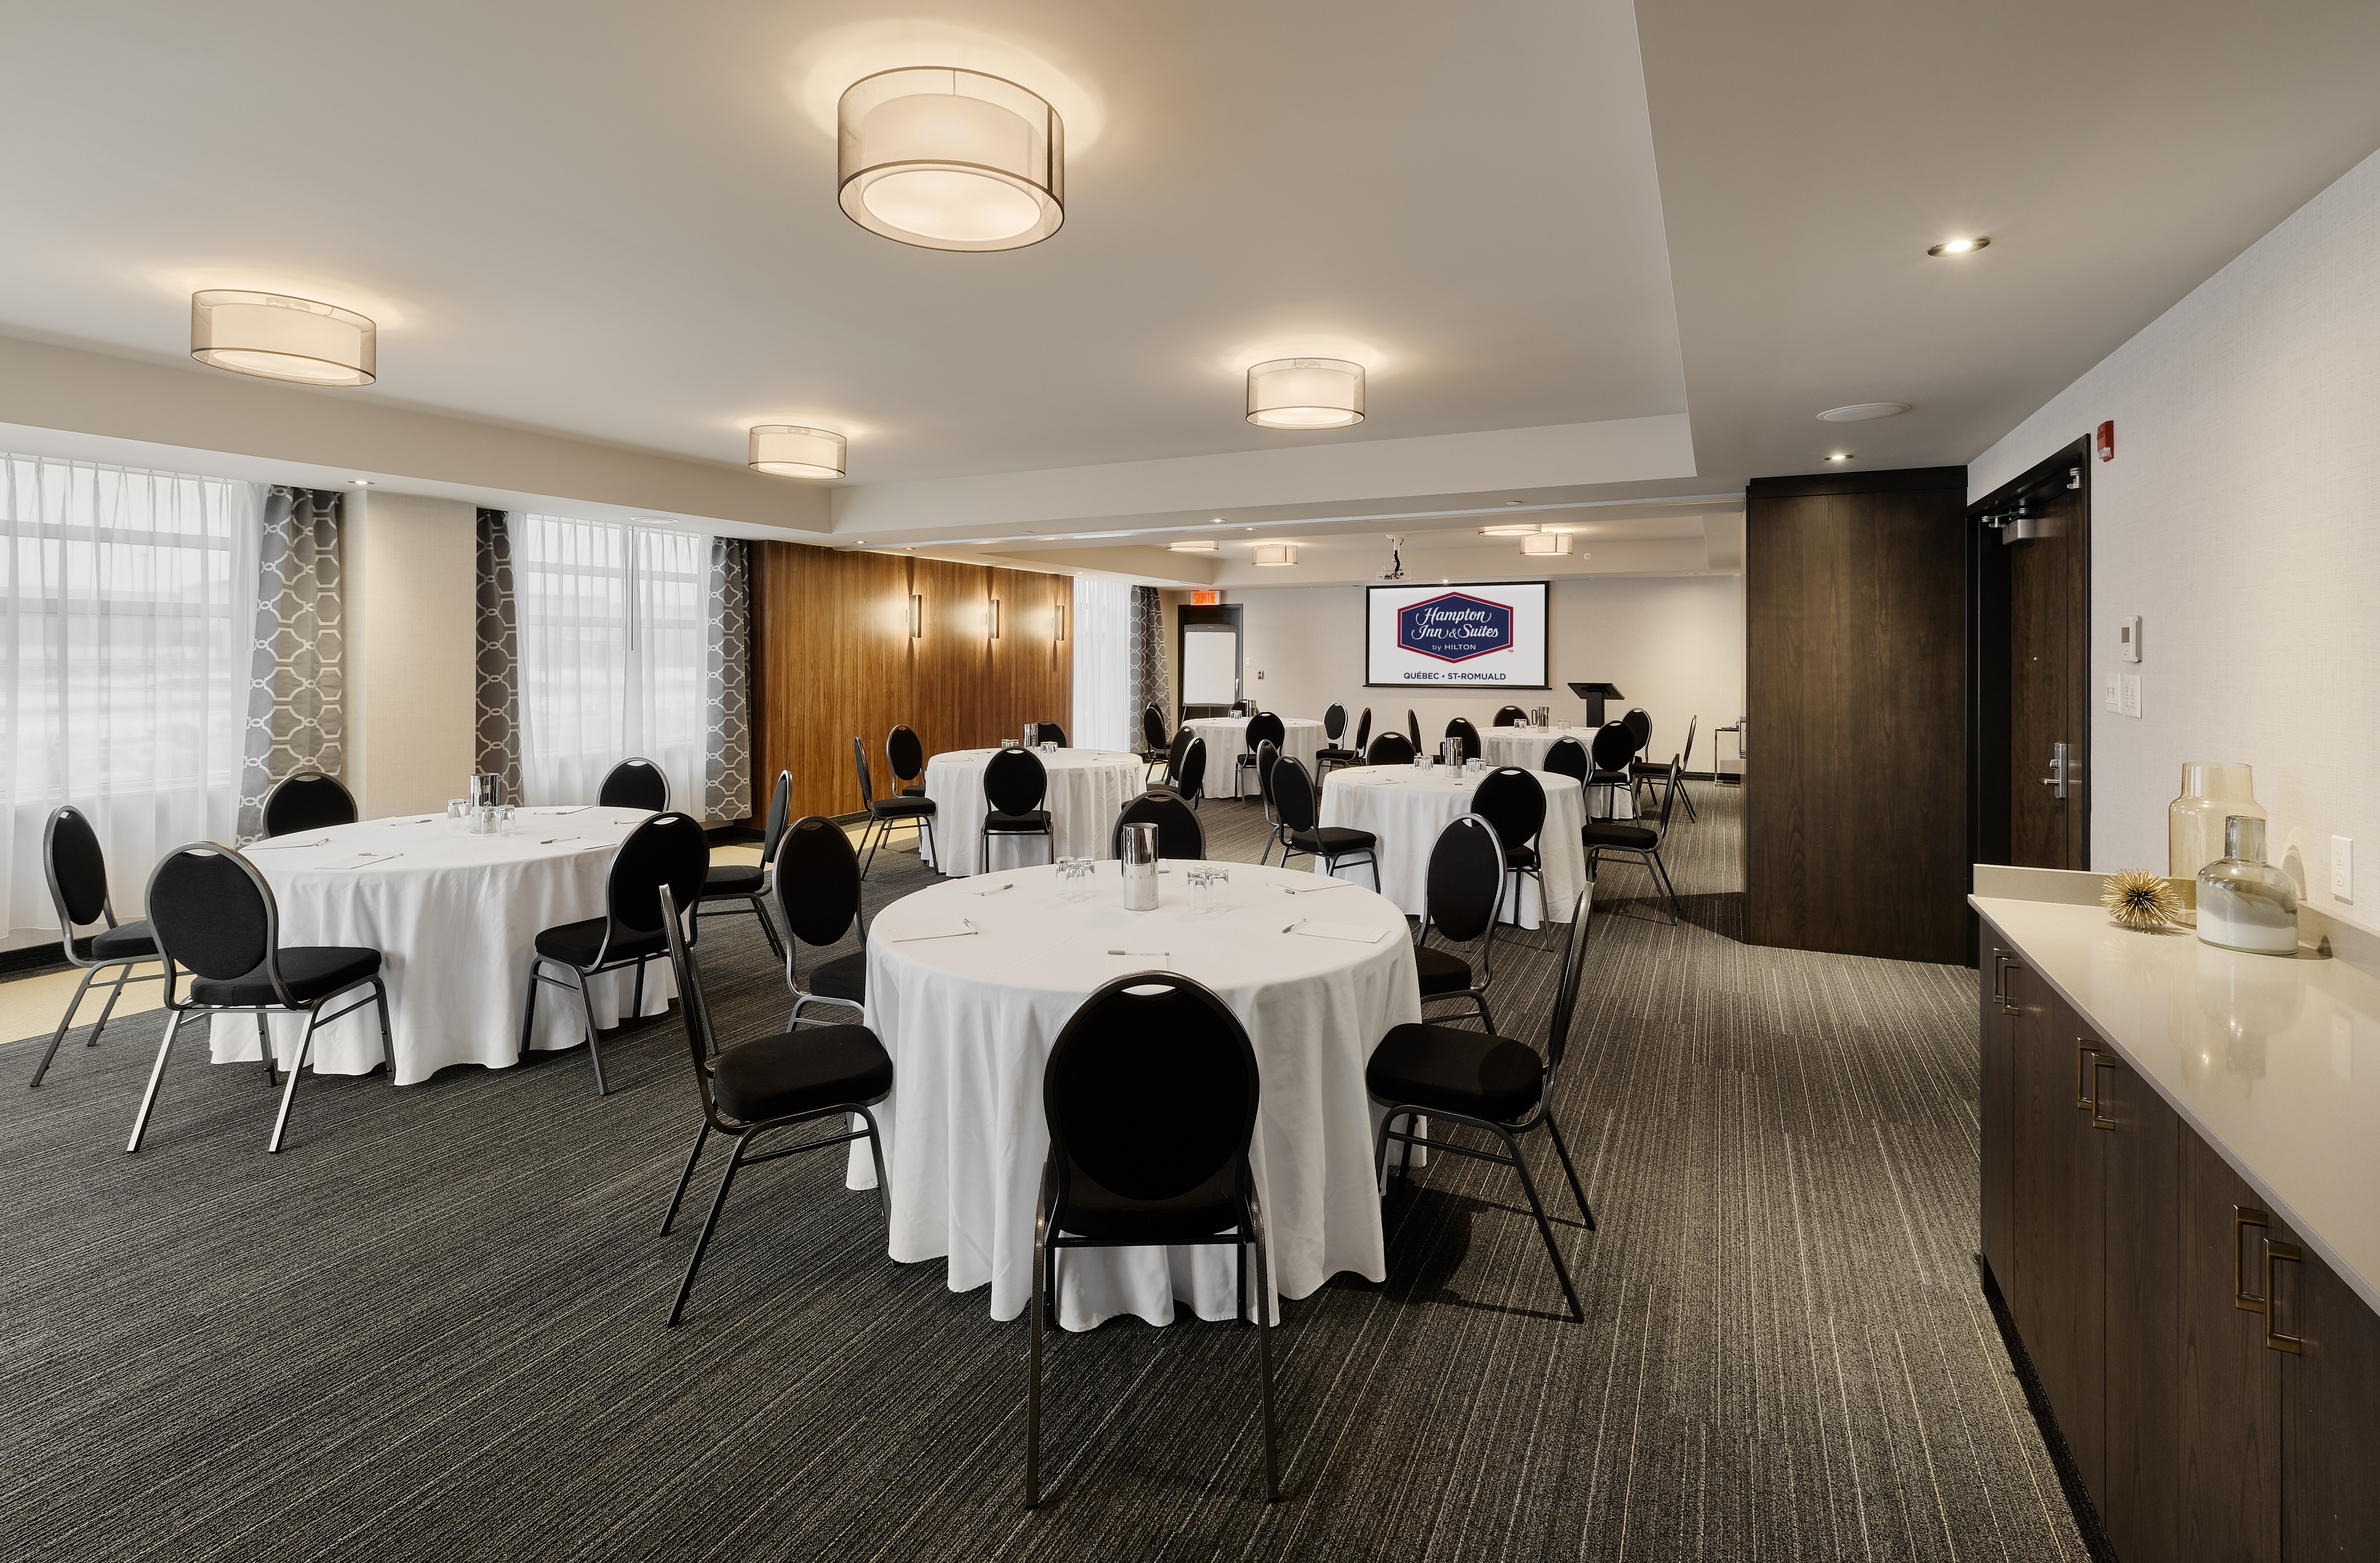 Ballroom with Round Tables, Chairs and Wall Mounted HDTV